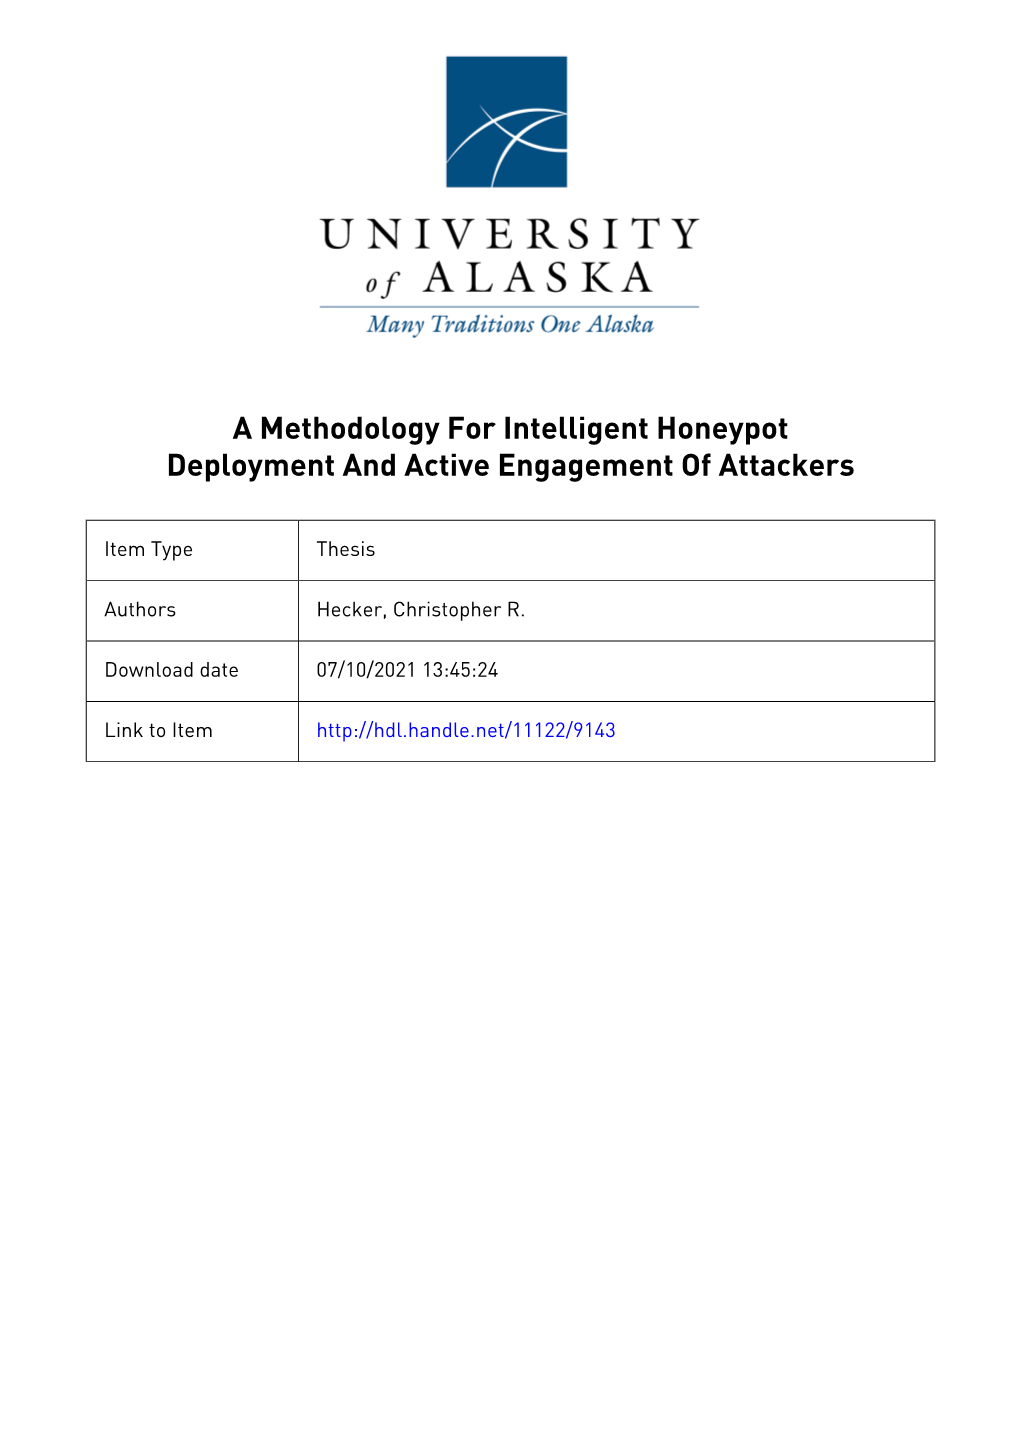 A Methodology for Intelligent Honeypot Deployment and Active Engagement of Attackers